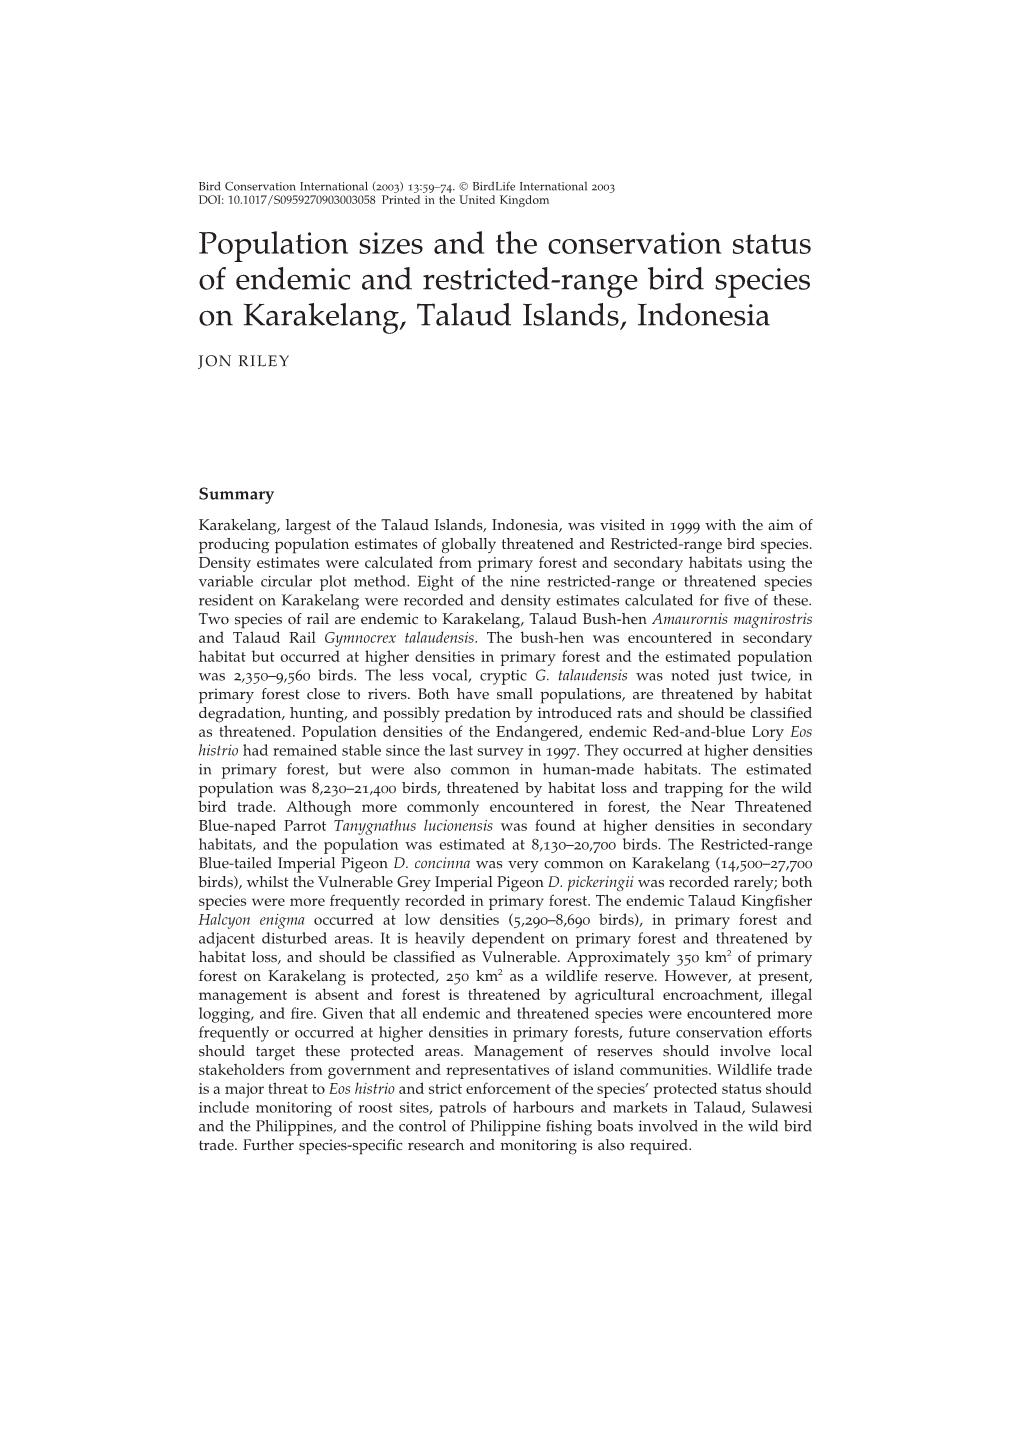 Population Sizes and the Conservation Status of Endemic and Restricted-Range Bird Species on Karakelang, Talaud Islands, Indonesia